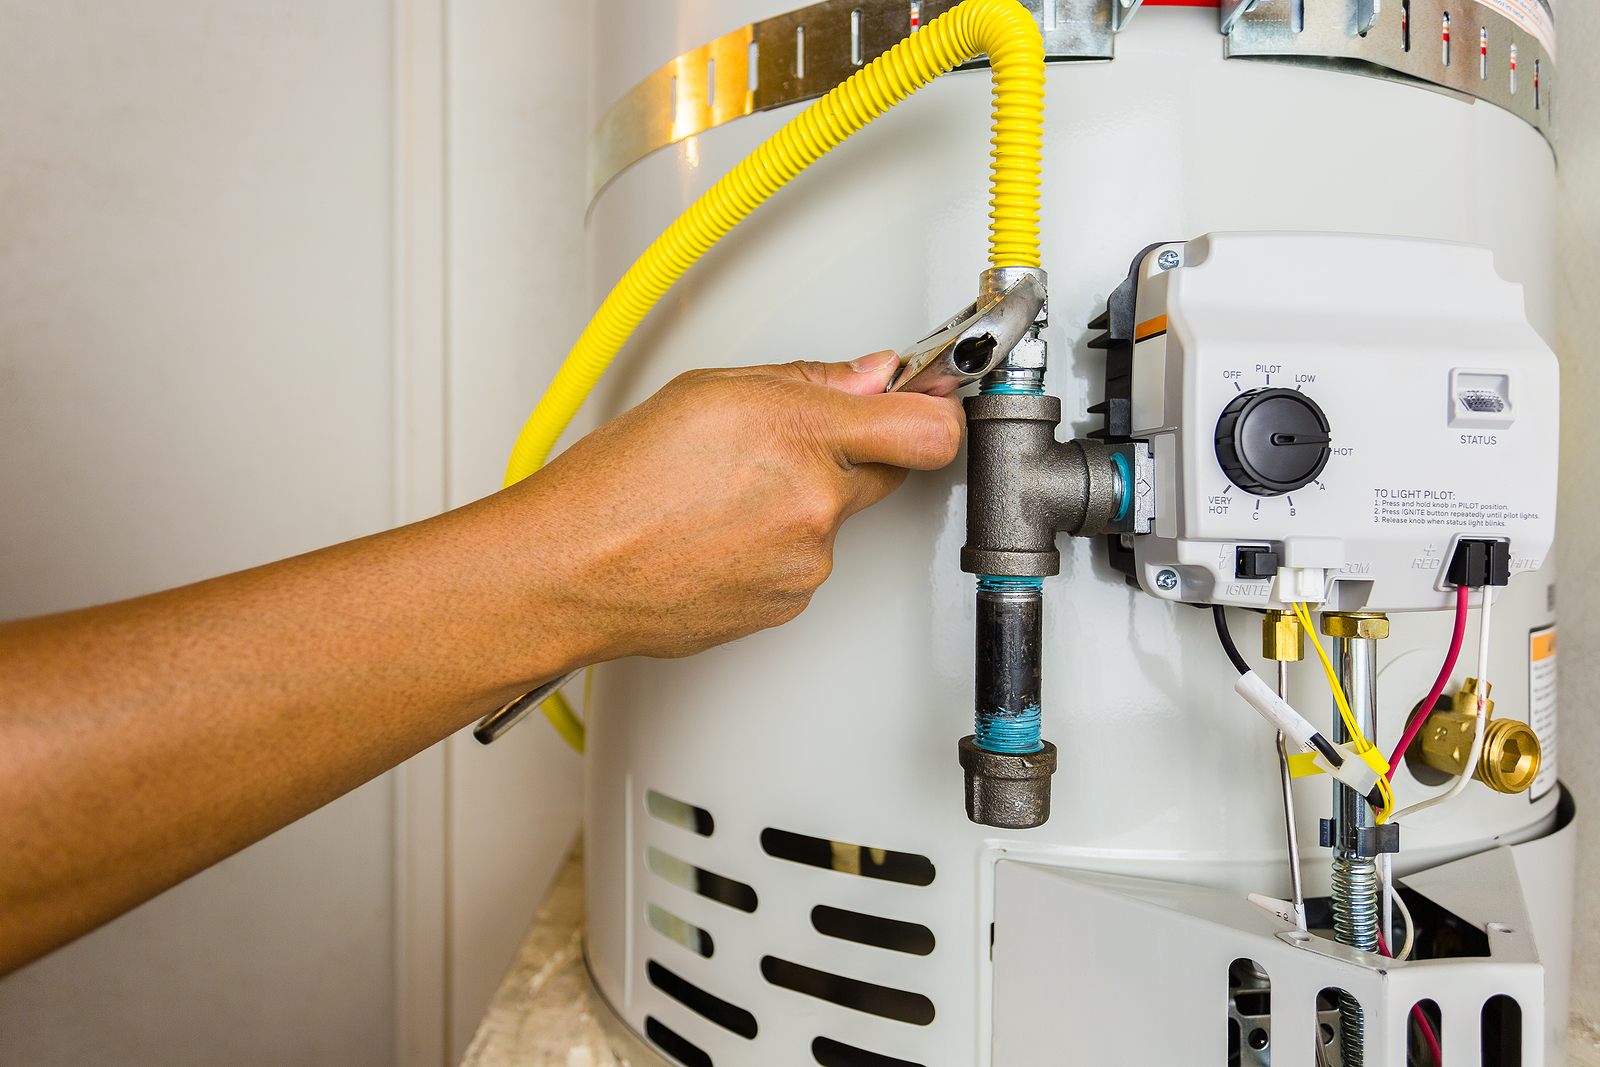 How To Reset A Water Heater 5 Issues That Could Trip the Water Heater Reset Button | Waldman Plumbing